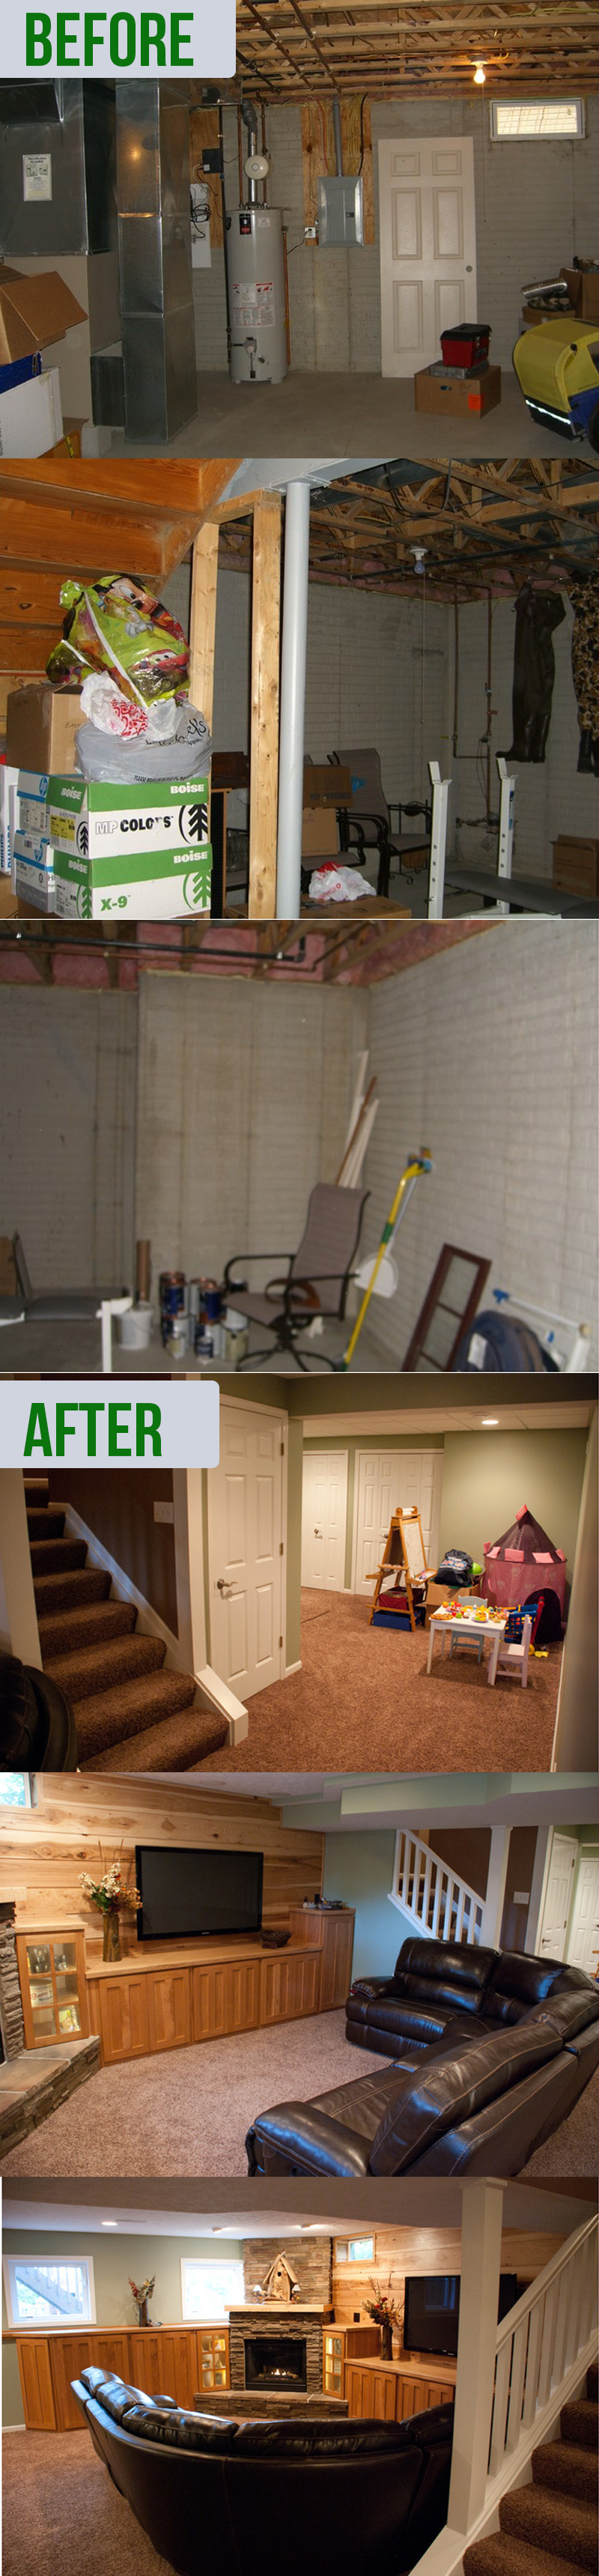 basement apartment renovation before and after